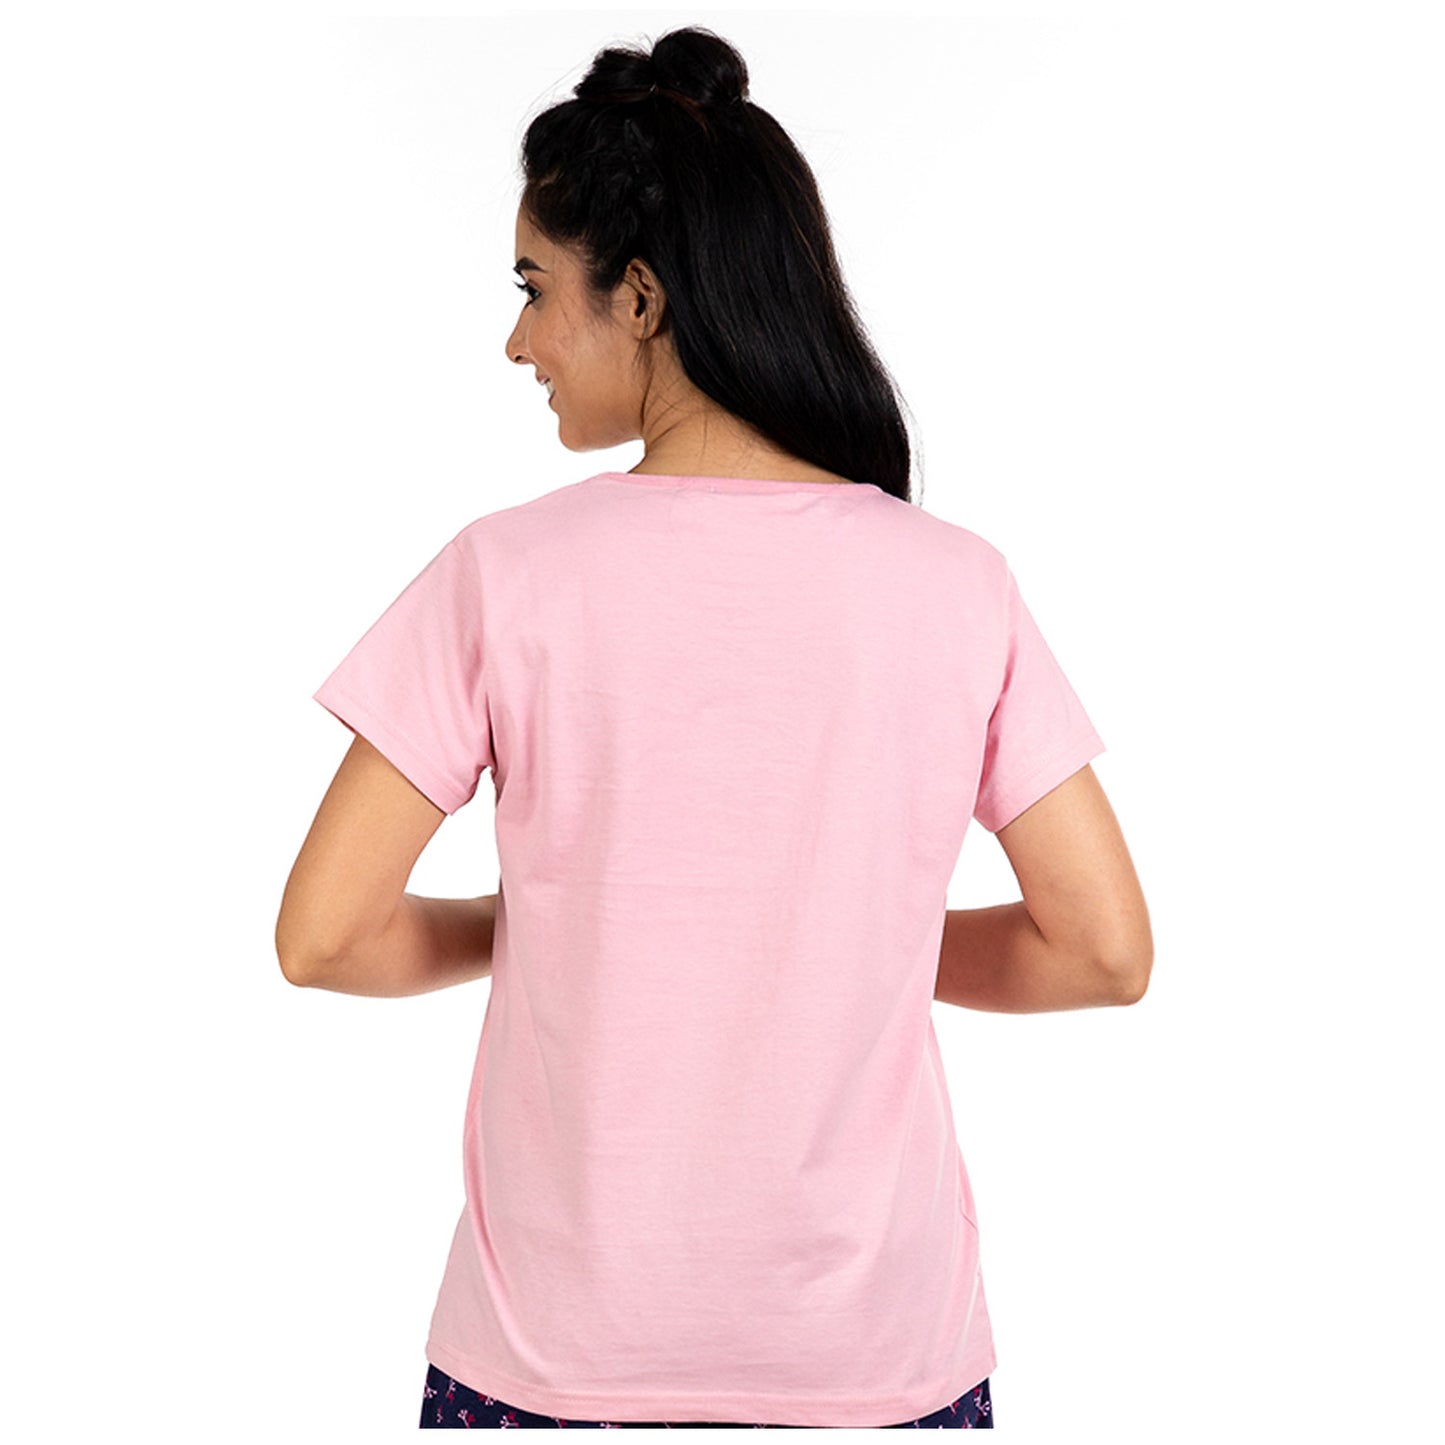 Back side of pink colour tshirt with short sleeves and round neck